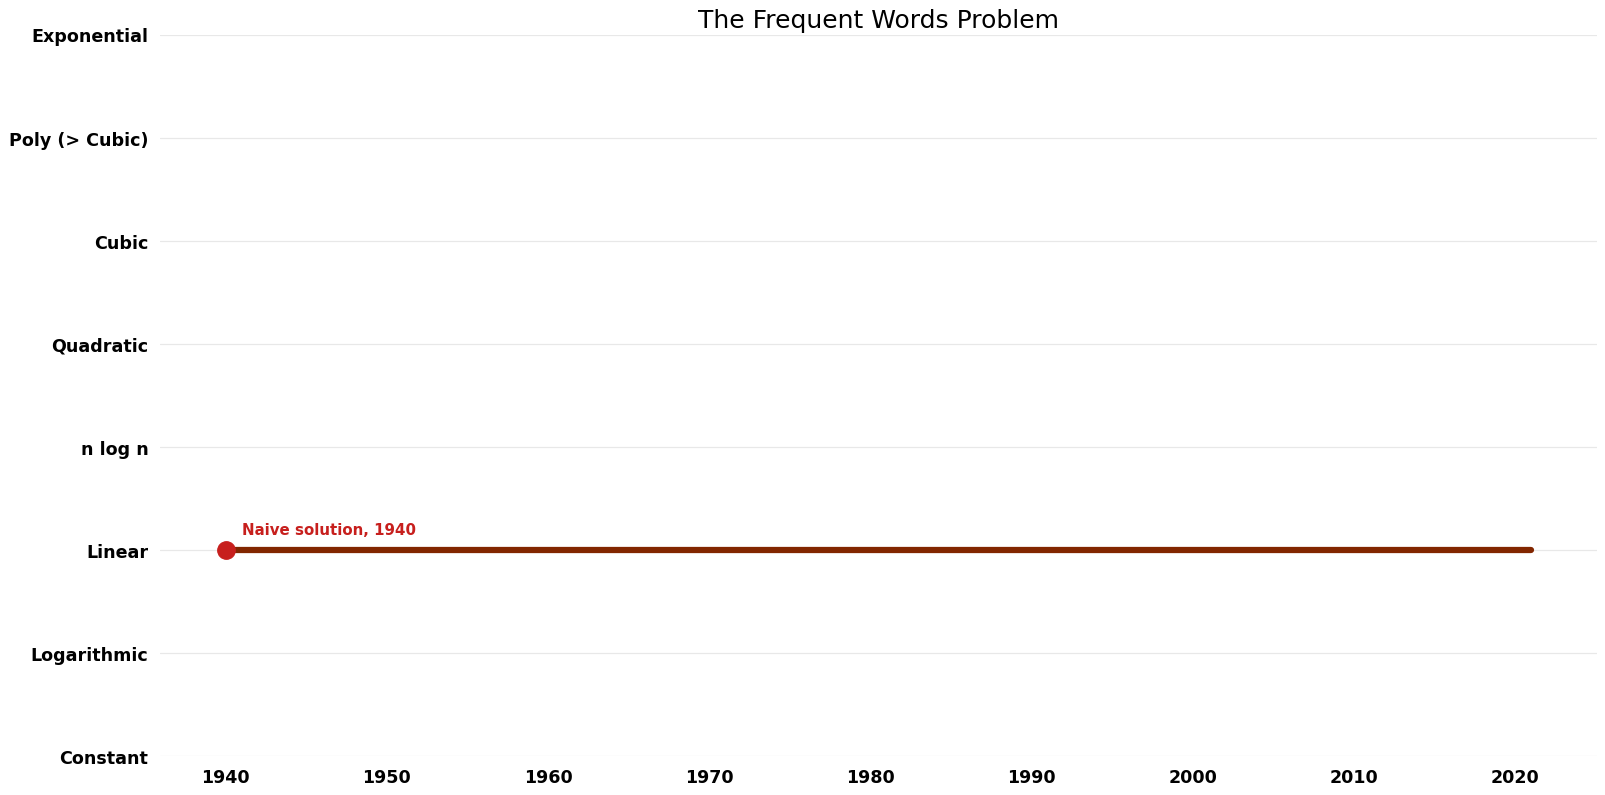 File:The Frequent Words Problem - Time.png